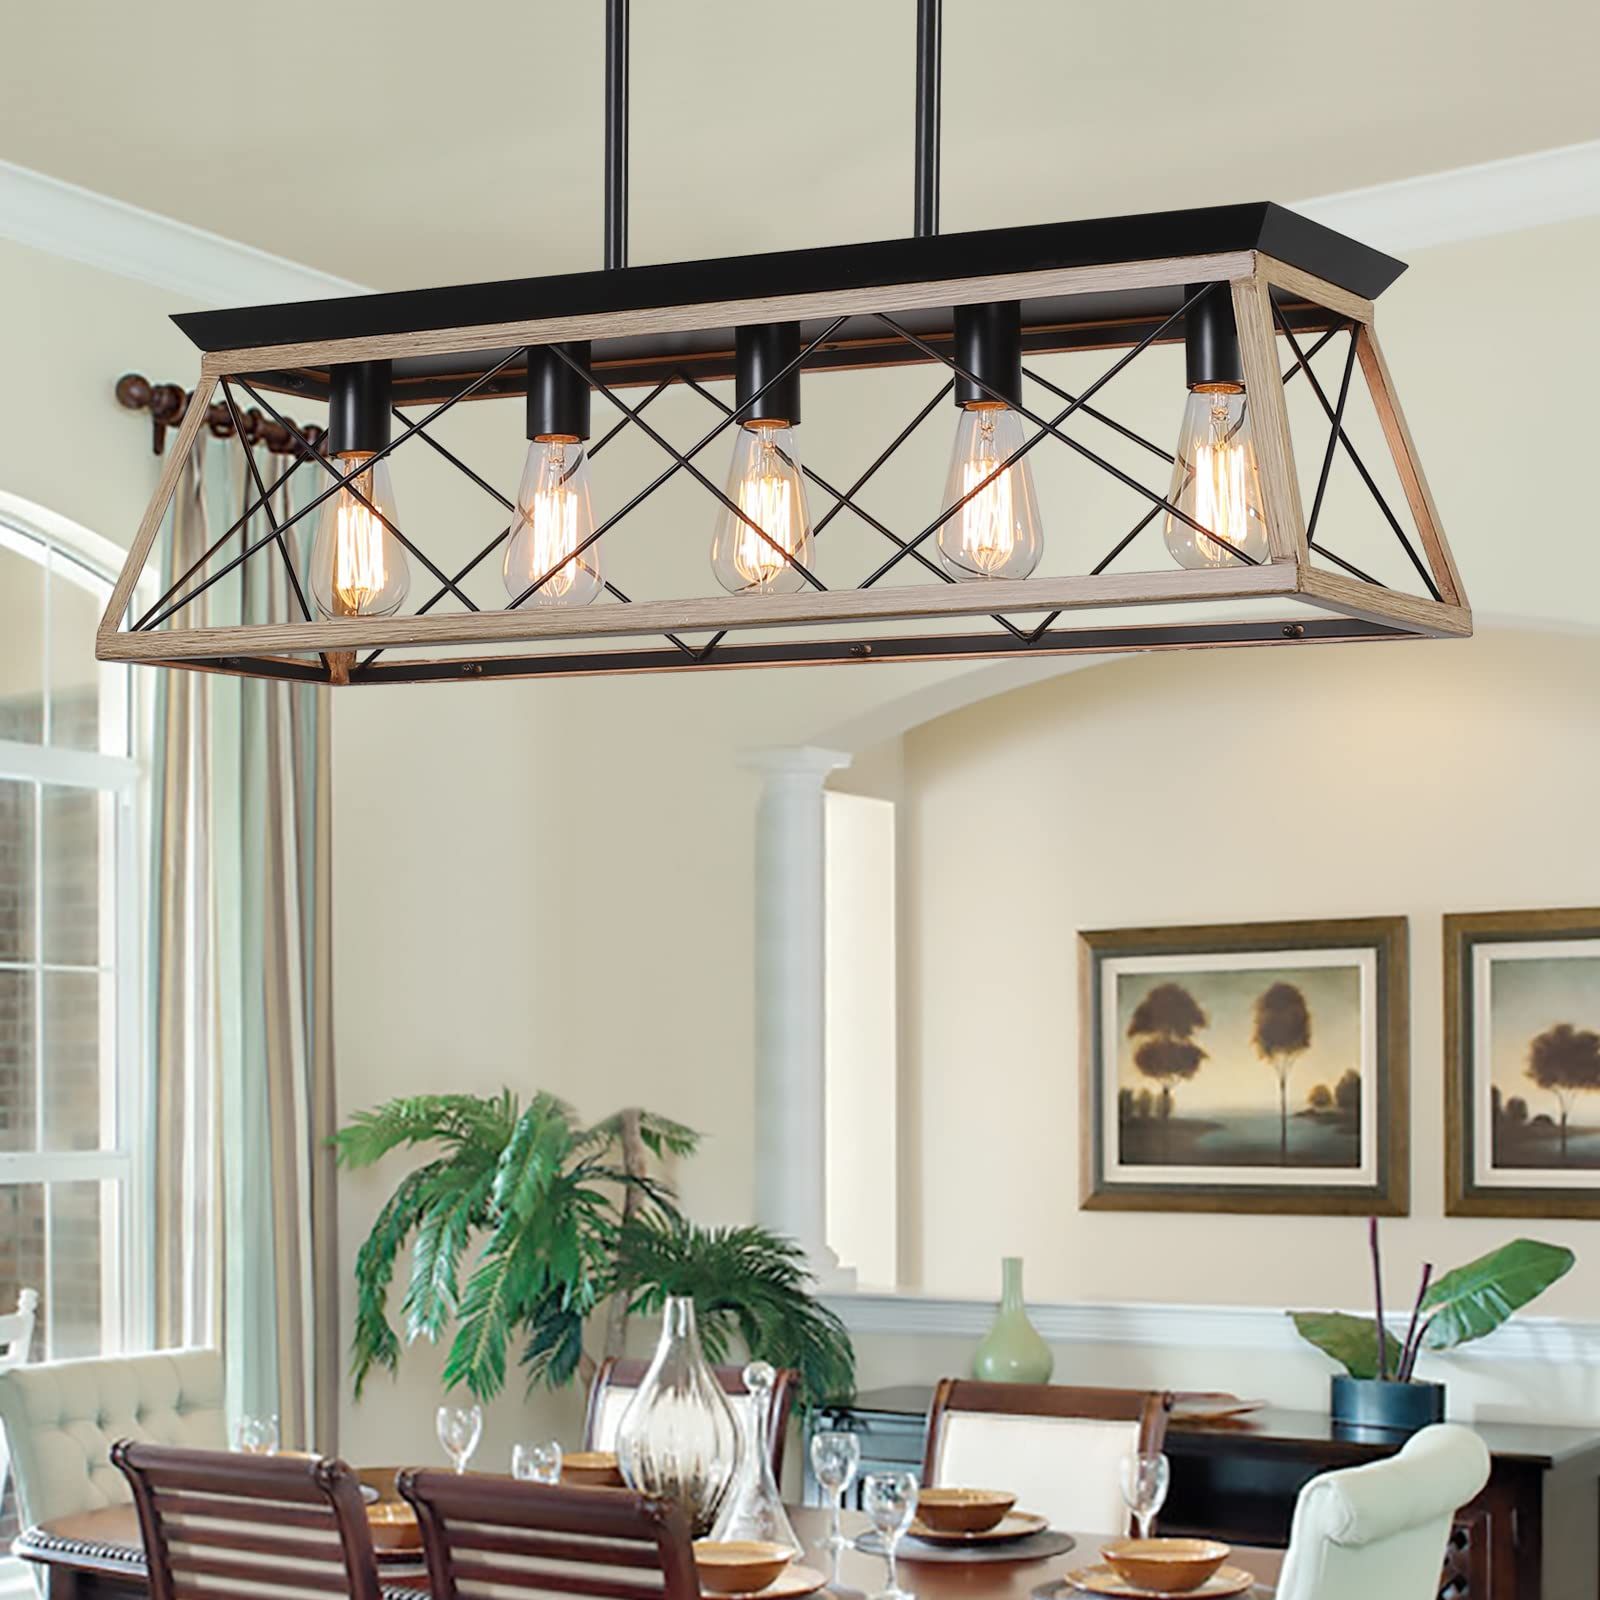 What Kind Of Lighting For Dining Room